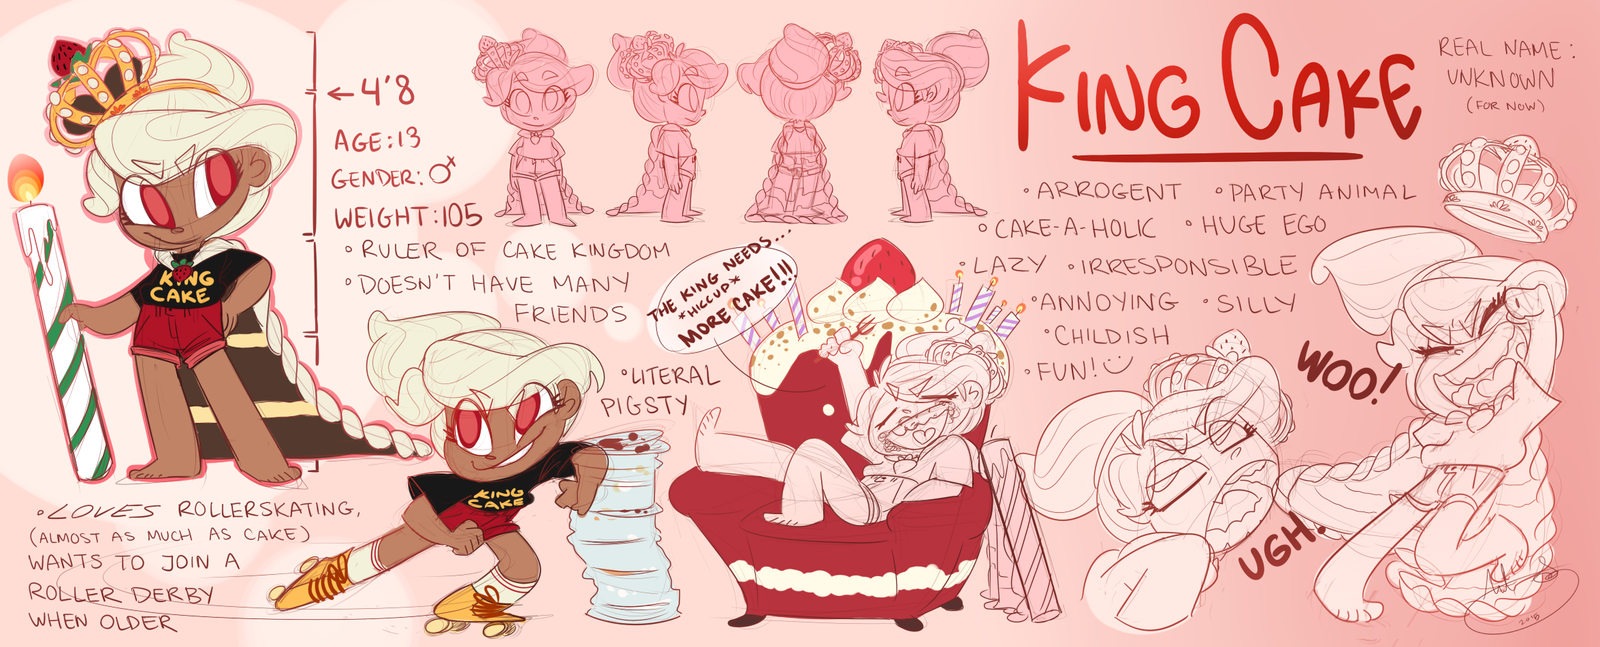 Character Sheet King Cake by NuttyXD on